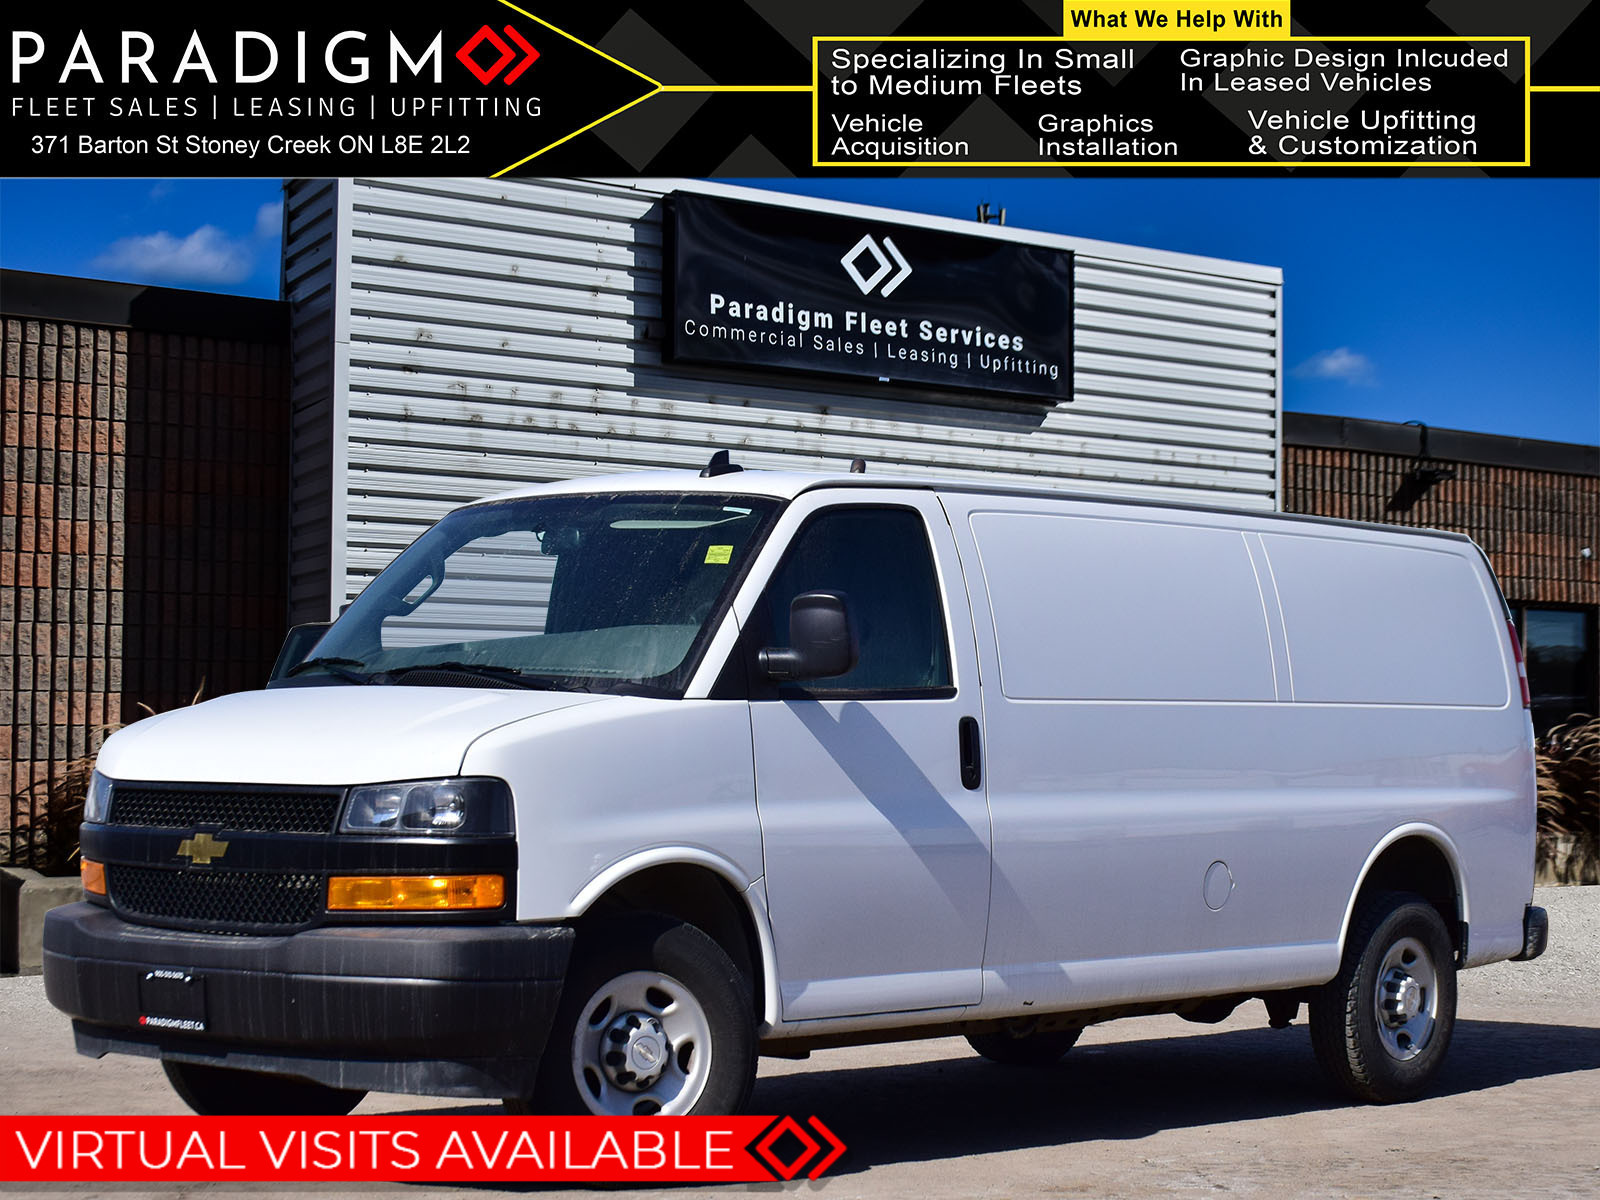 2016 chevrolet express 2500 for sale